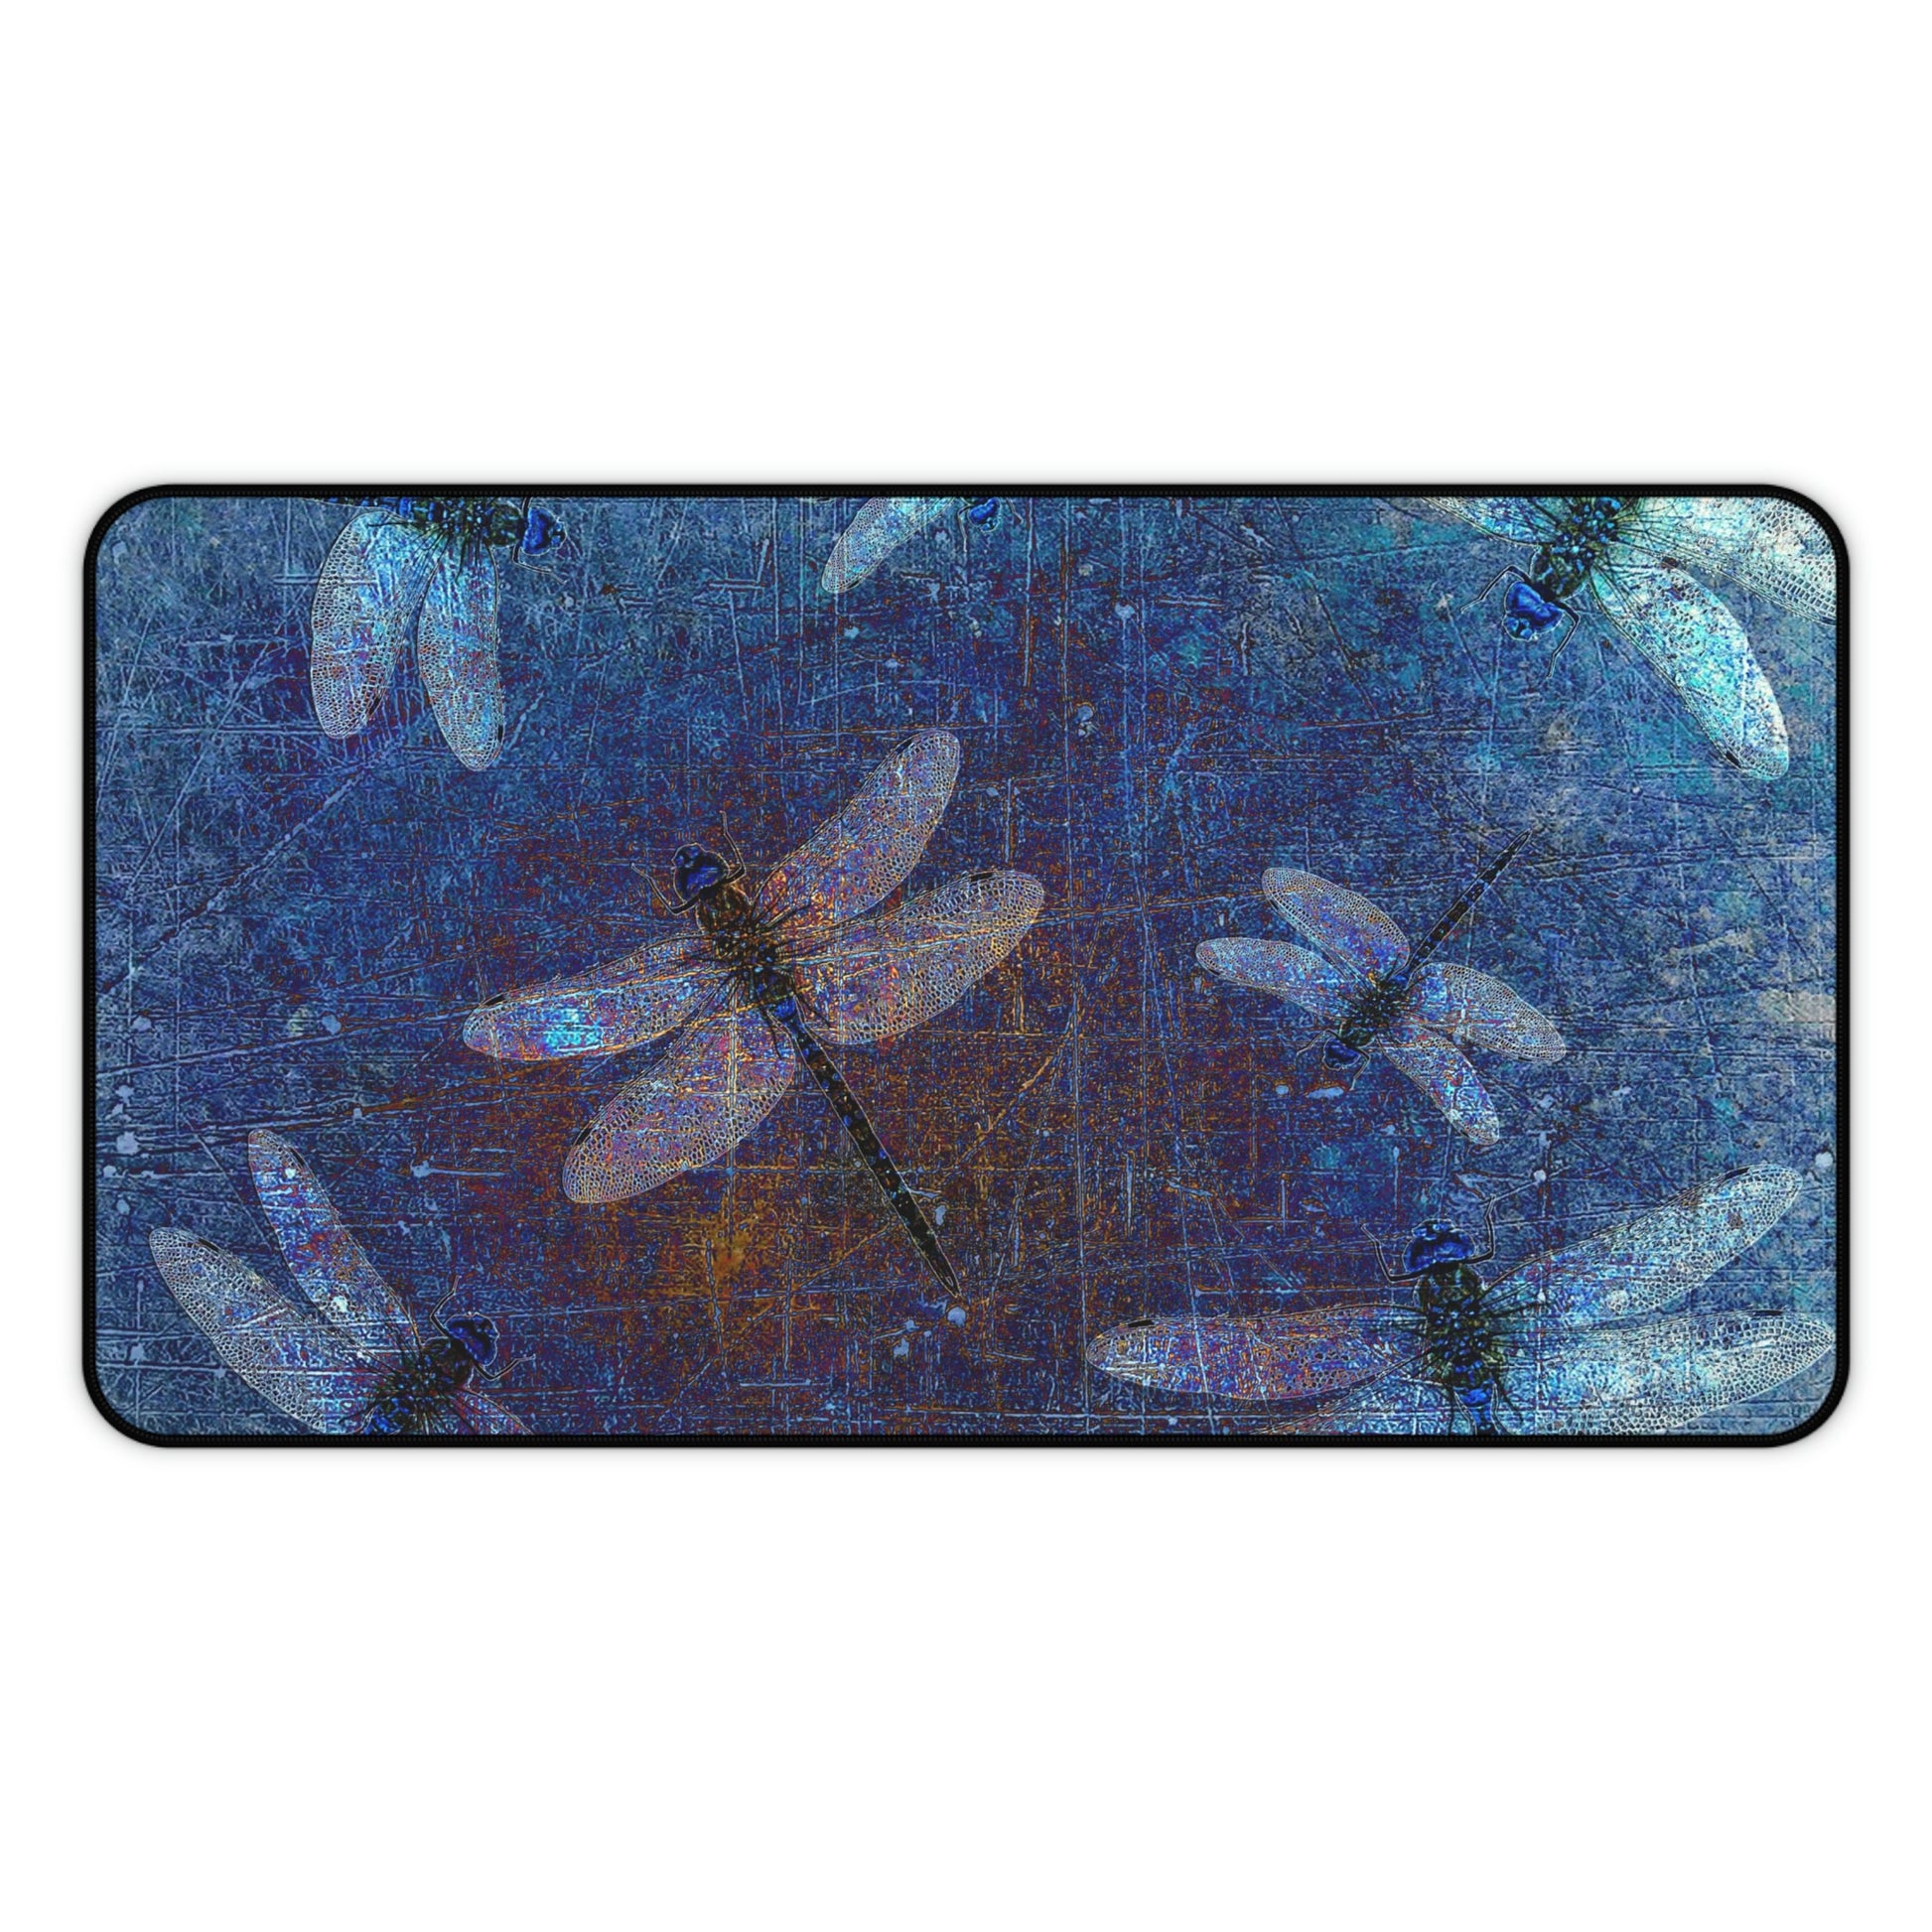 Dragonfly Desk Accessories - Flight of Dragonflies on Distressed Blue Background 12x22